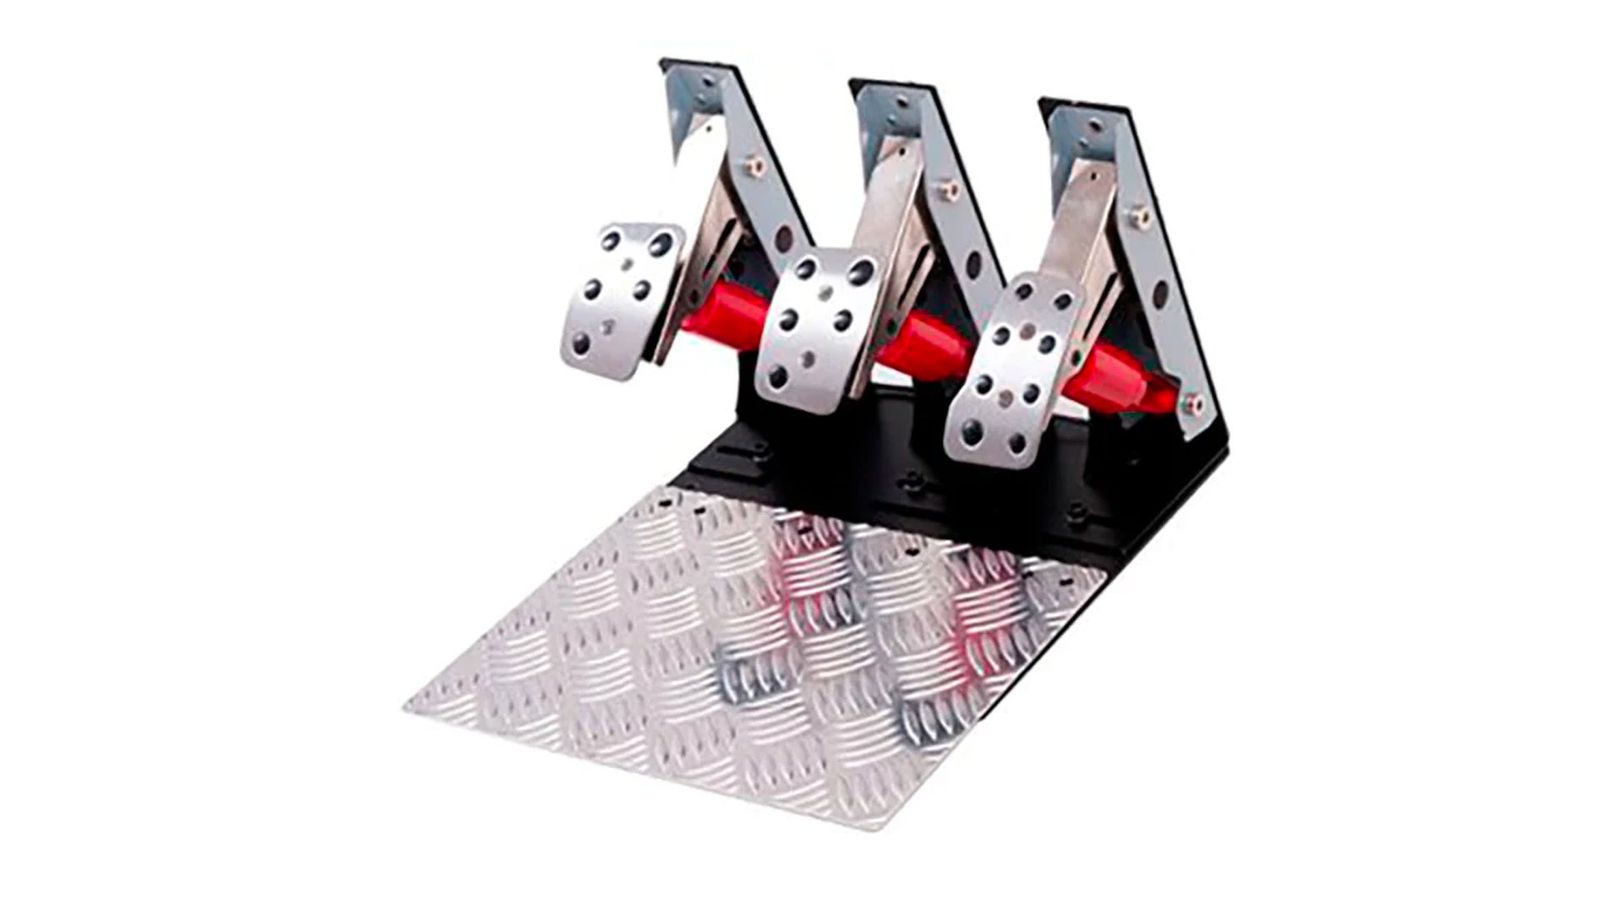 Extreme Simracing Inverted Pedal Kit product image of a set of three silver metal pedals with red and black details.